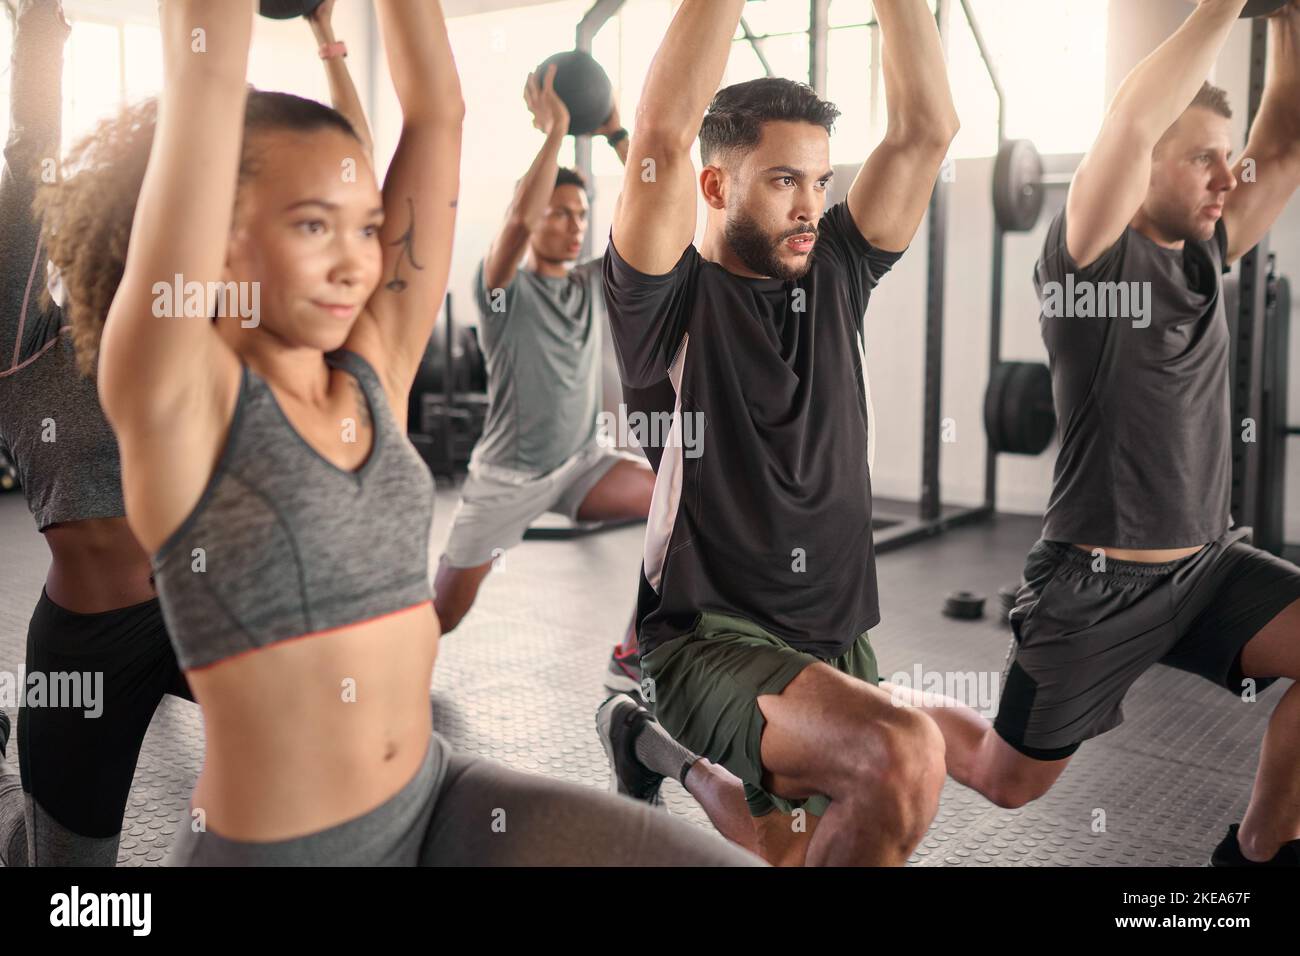 Workout class, fitness and training in a gym with diversity doing health exercise with balance. Athlete, wellness and sports group or cardio friends Stock Photo